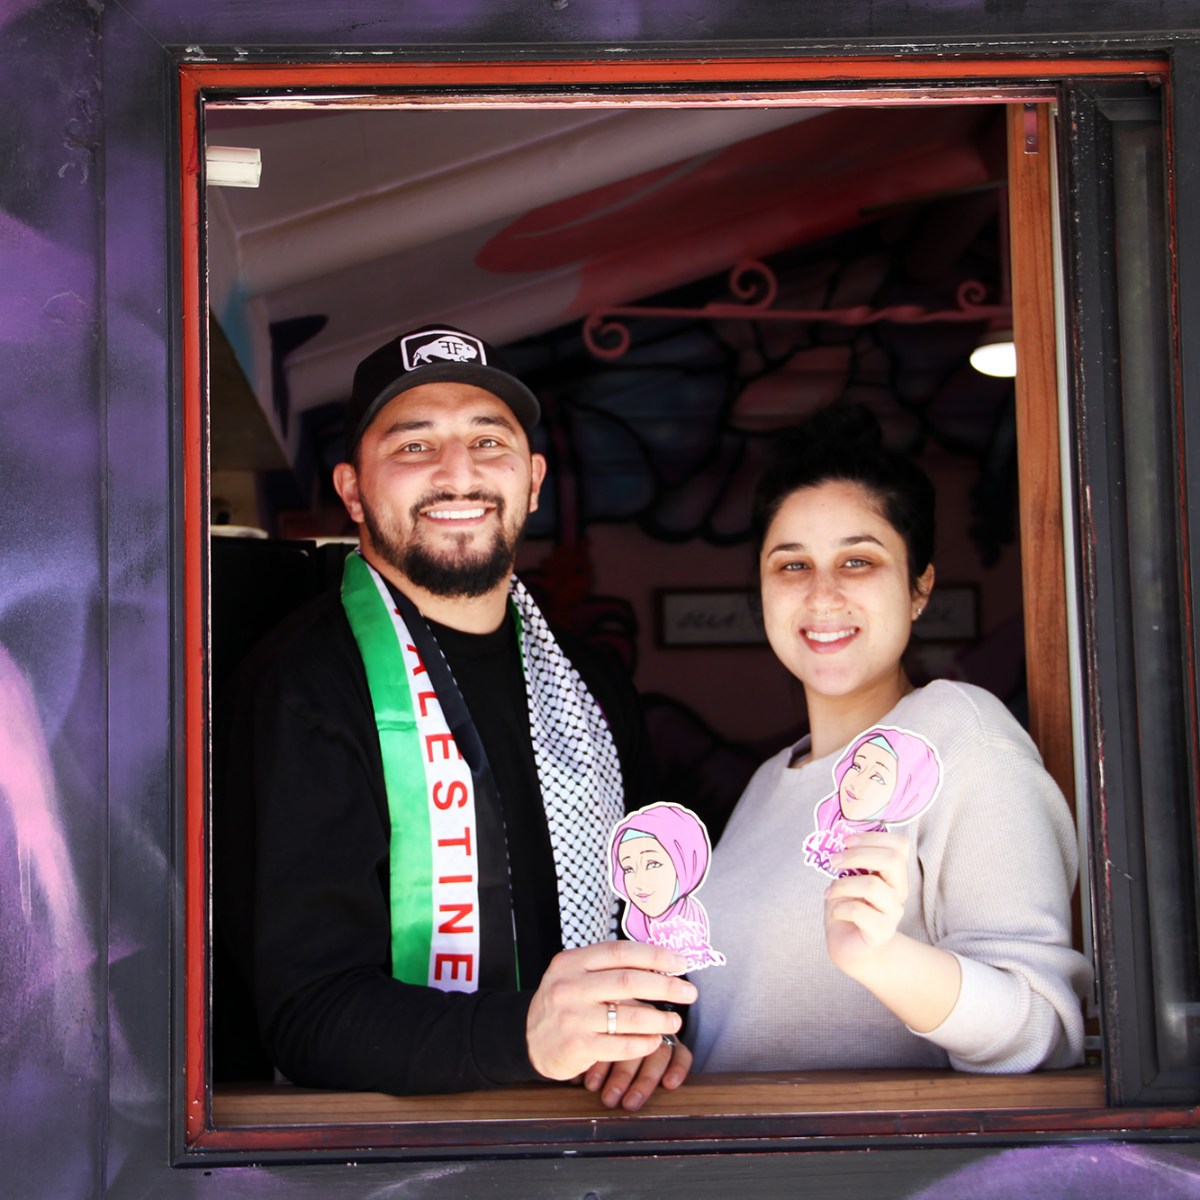 Six years in, the East Bay’s first halal taqueria is building community and ready for expansion